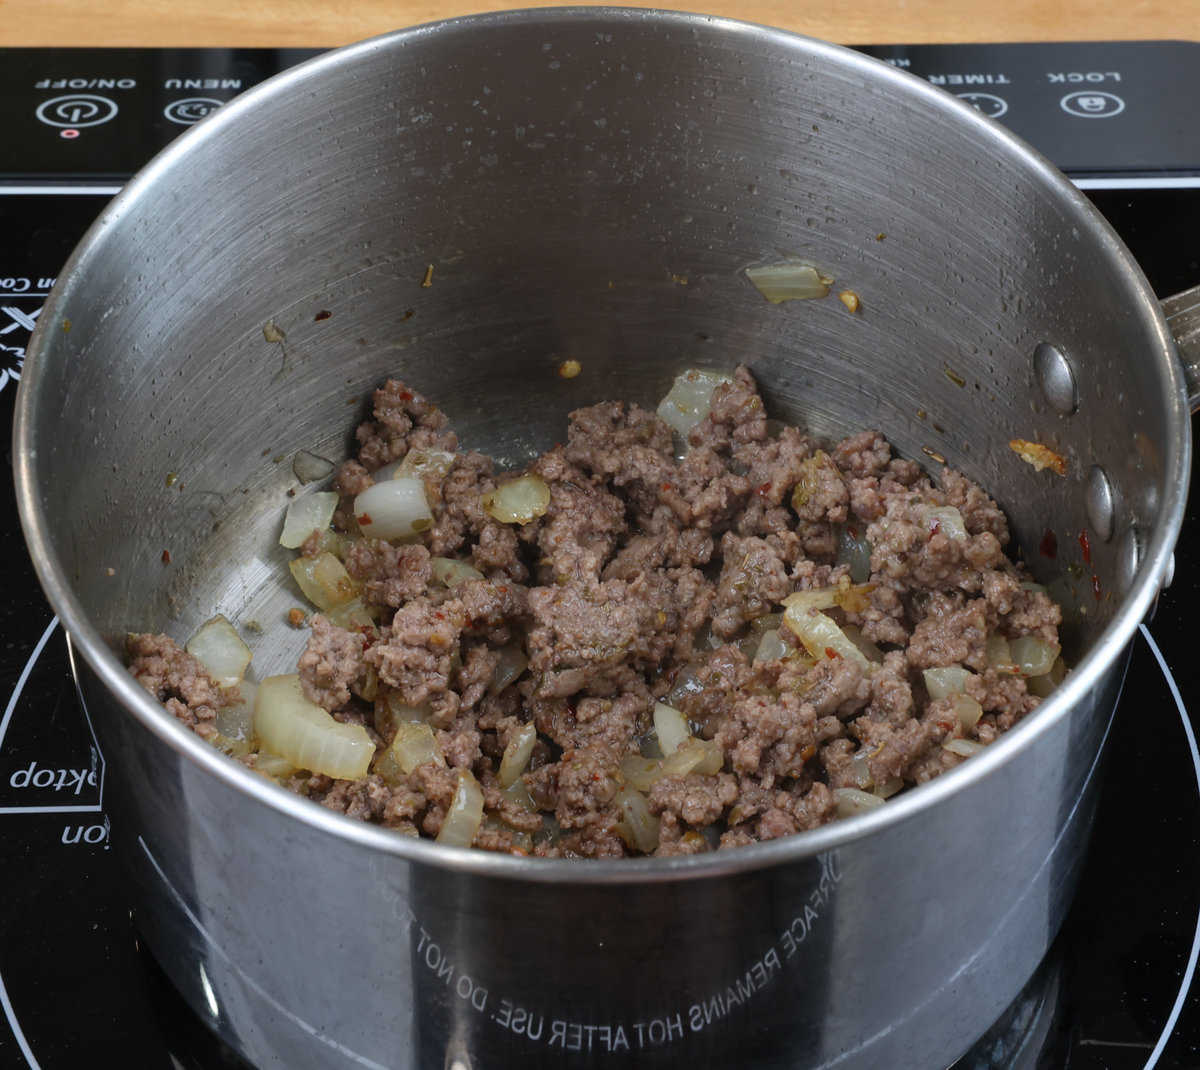 ground beef, onions, garlic, and seasonings cooking in a small pot.